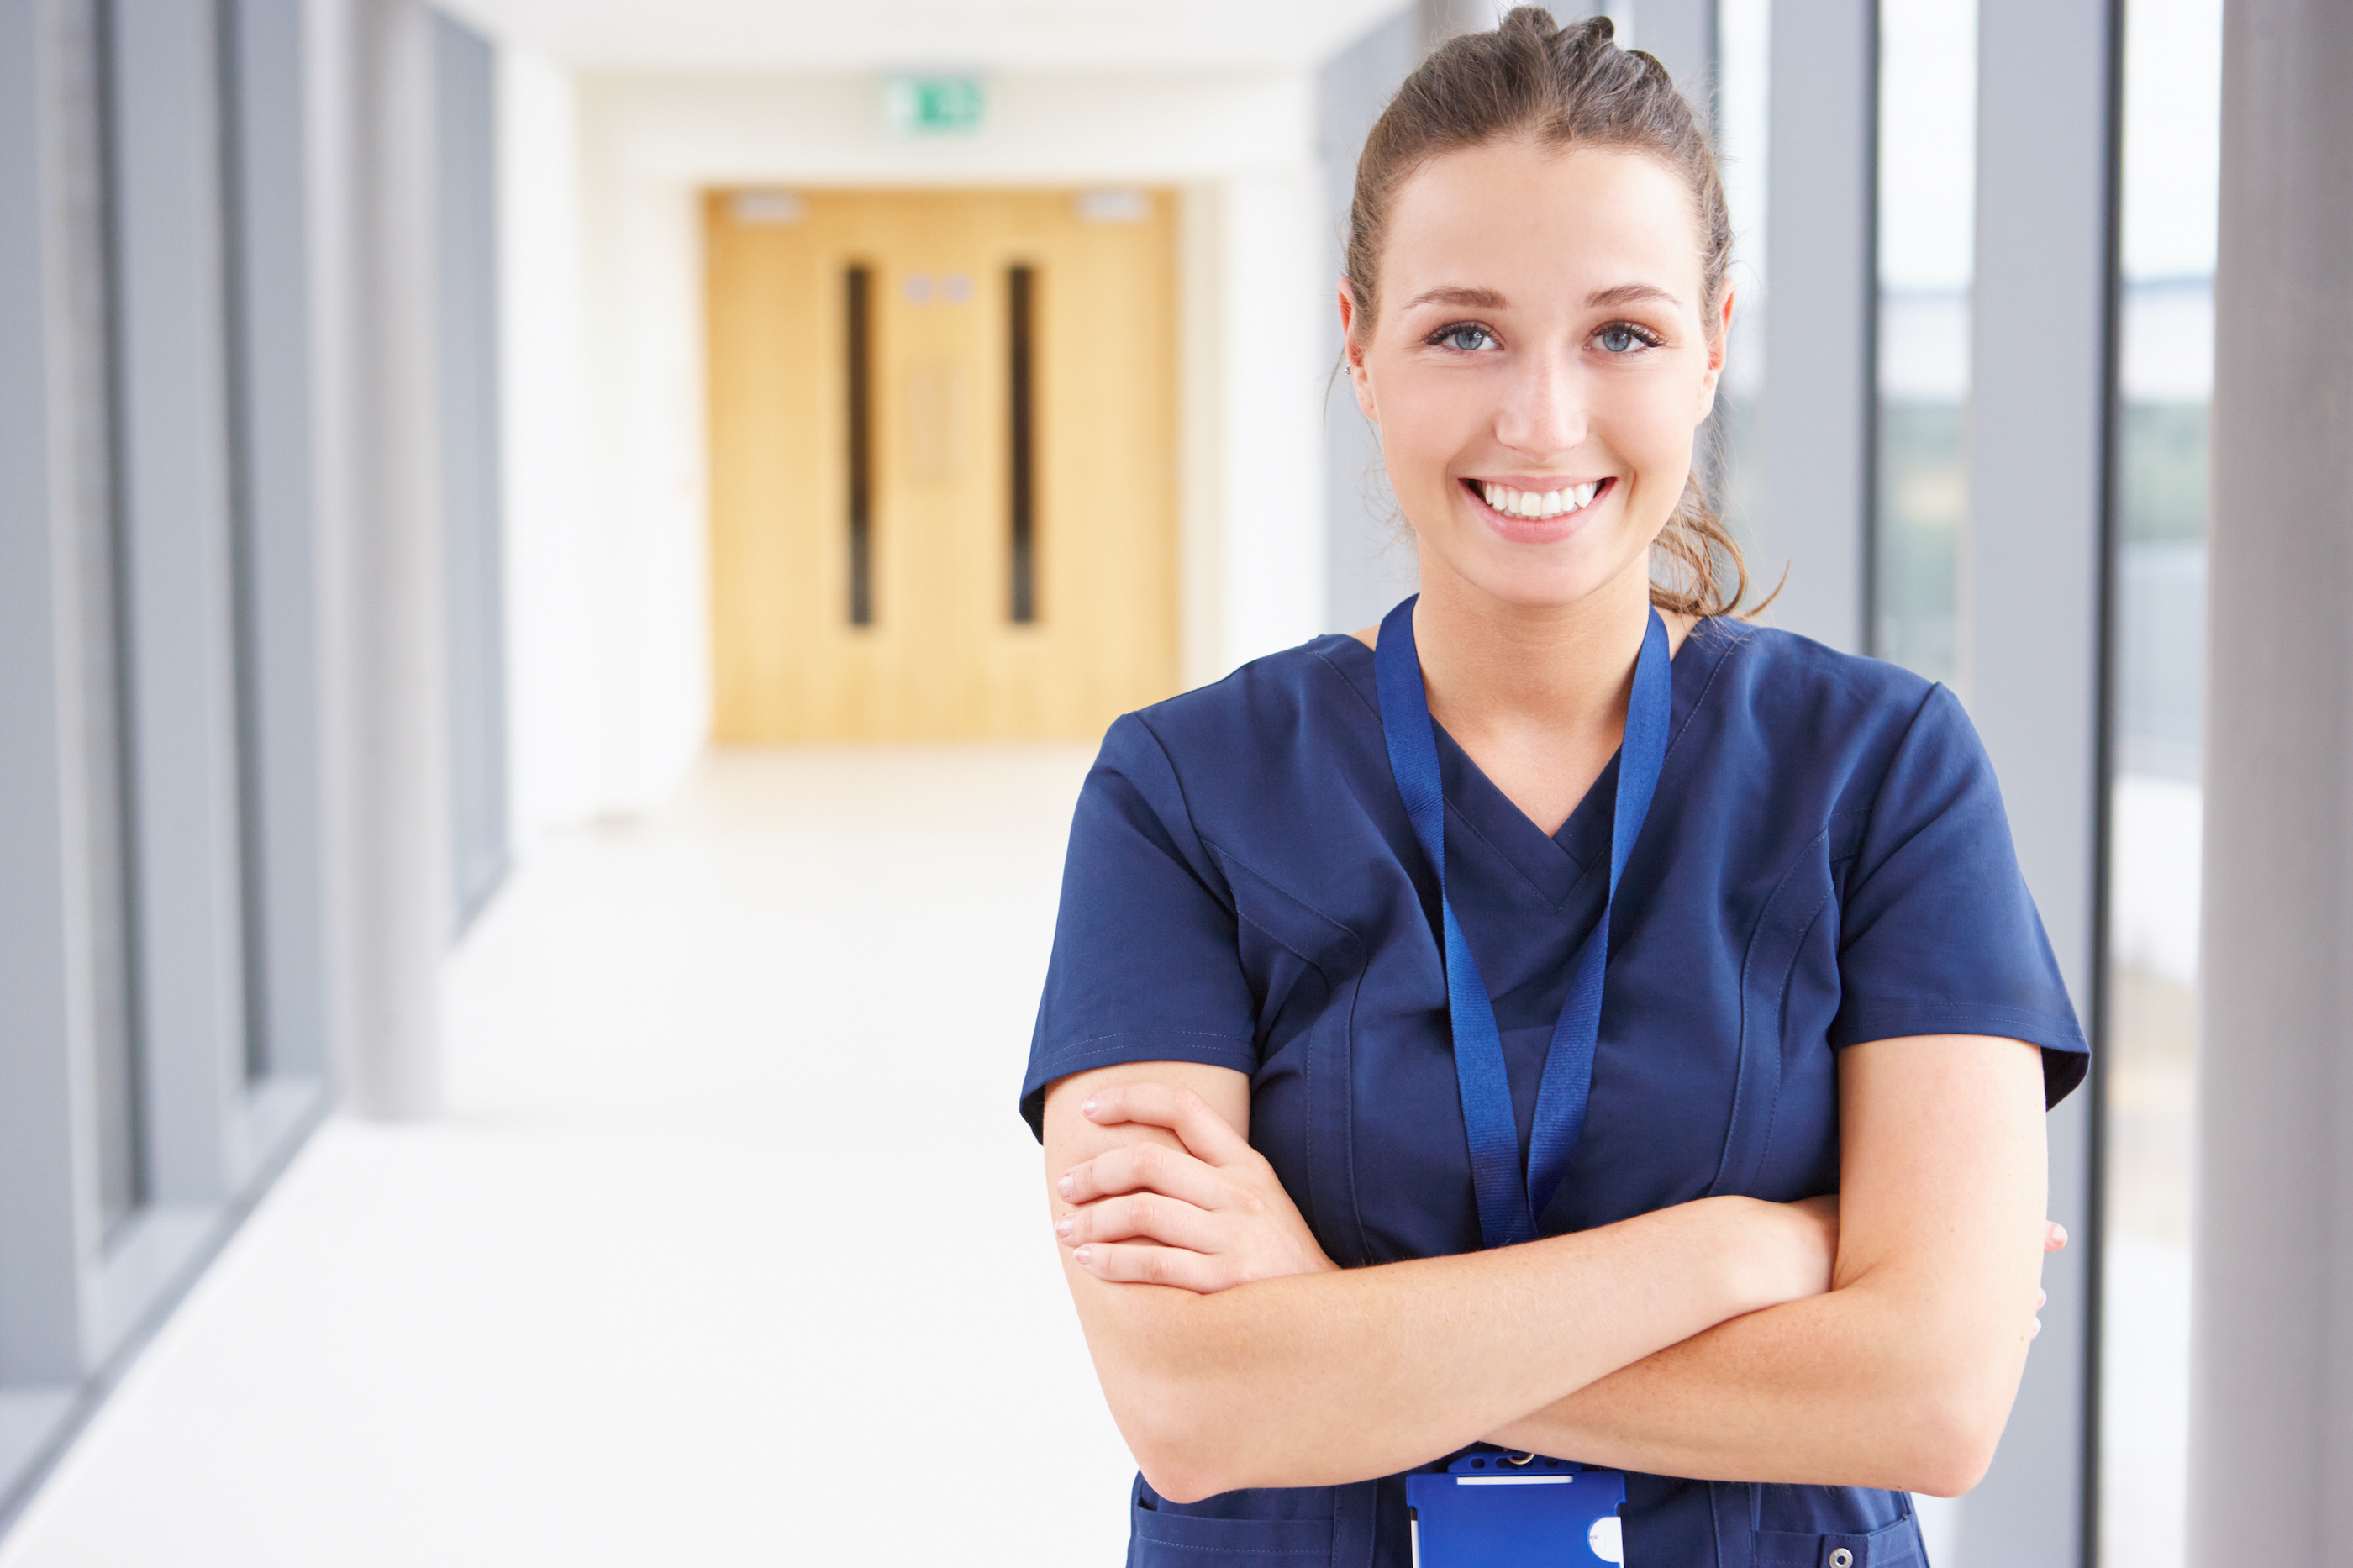 4 Tips When Becoming a Medical Assistant